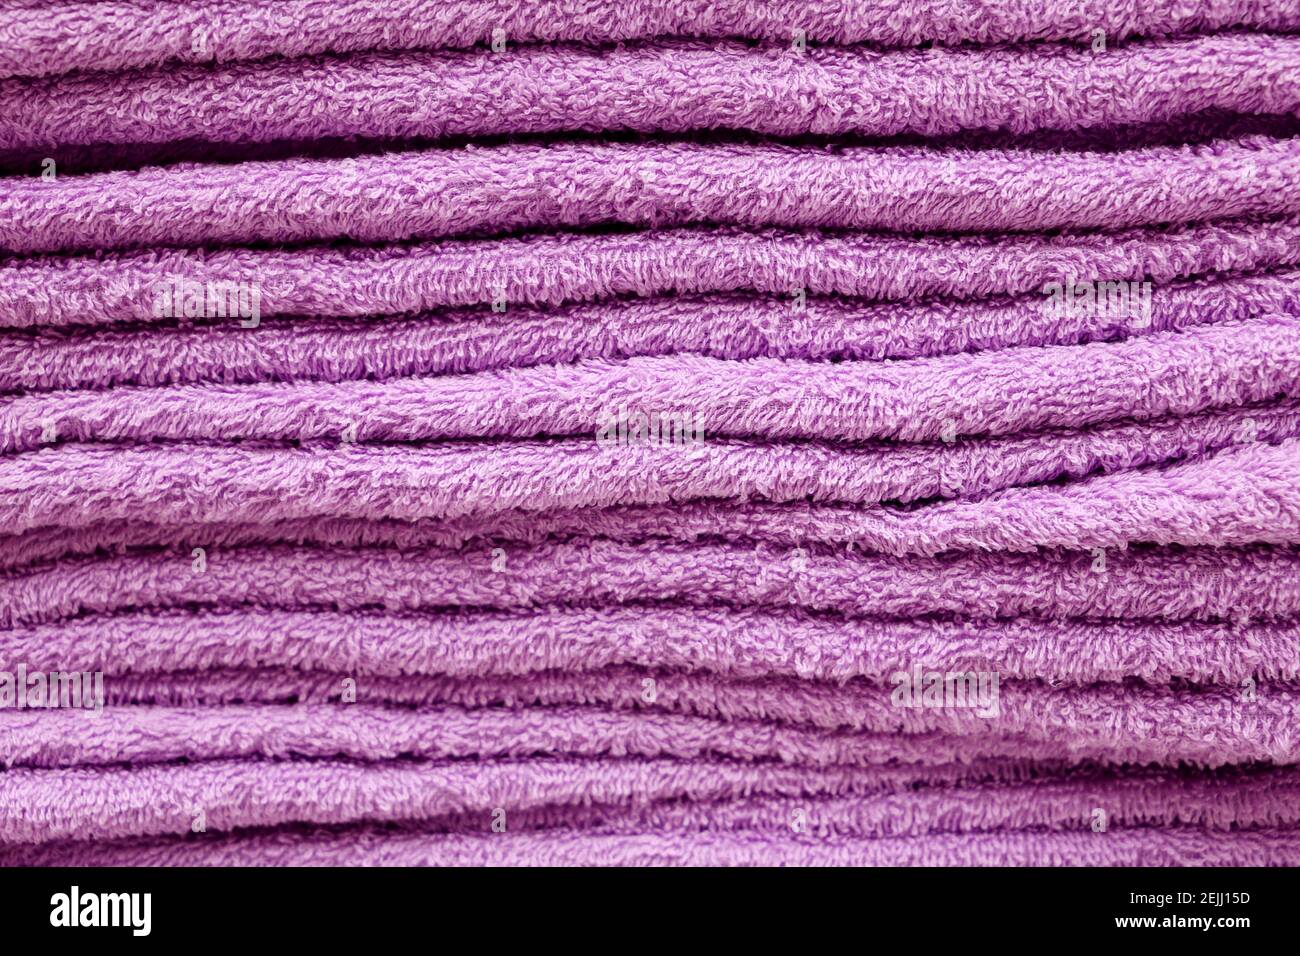 Stack of terry towels, selective focus. Soft background, purple bath textile close up Stock Photo